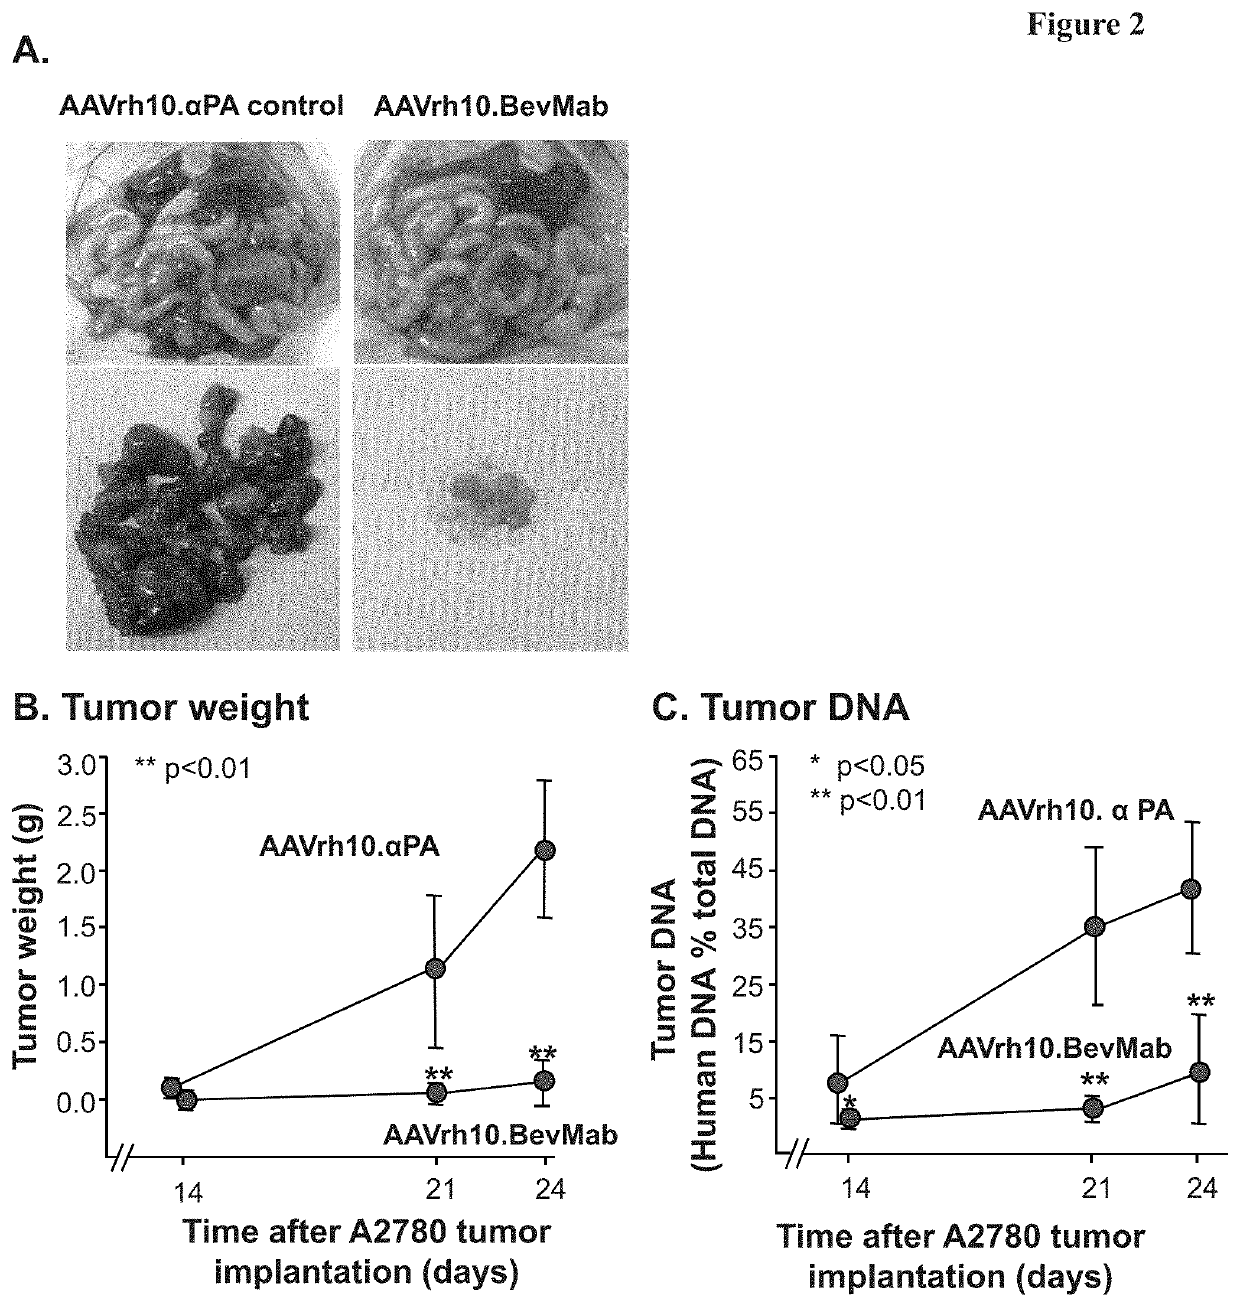 Adenoassociated viral mediated persistant anti-VEGF therapy for ovarian cancer